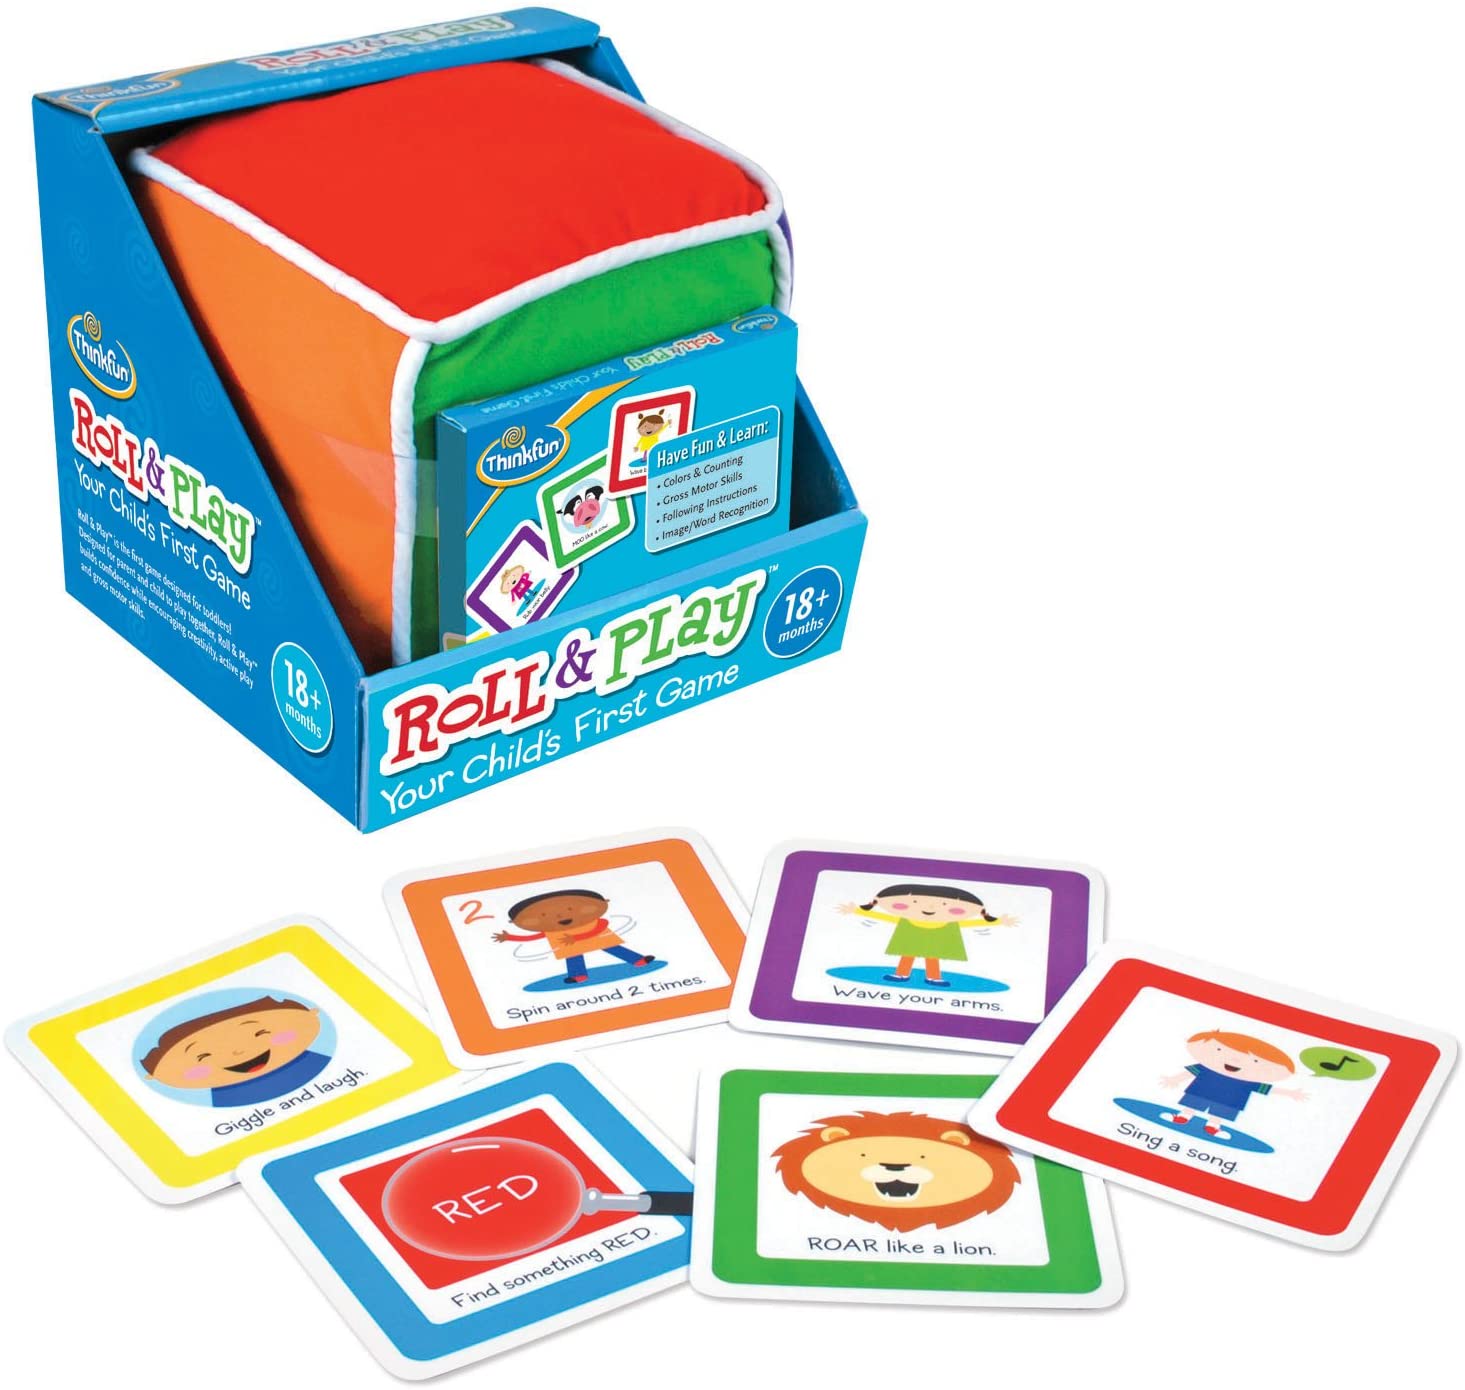 Roll & Play: Your Child’s First Game by Thinkfun